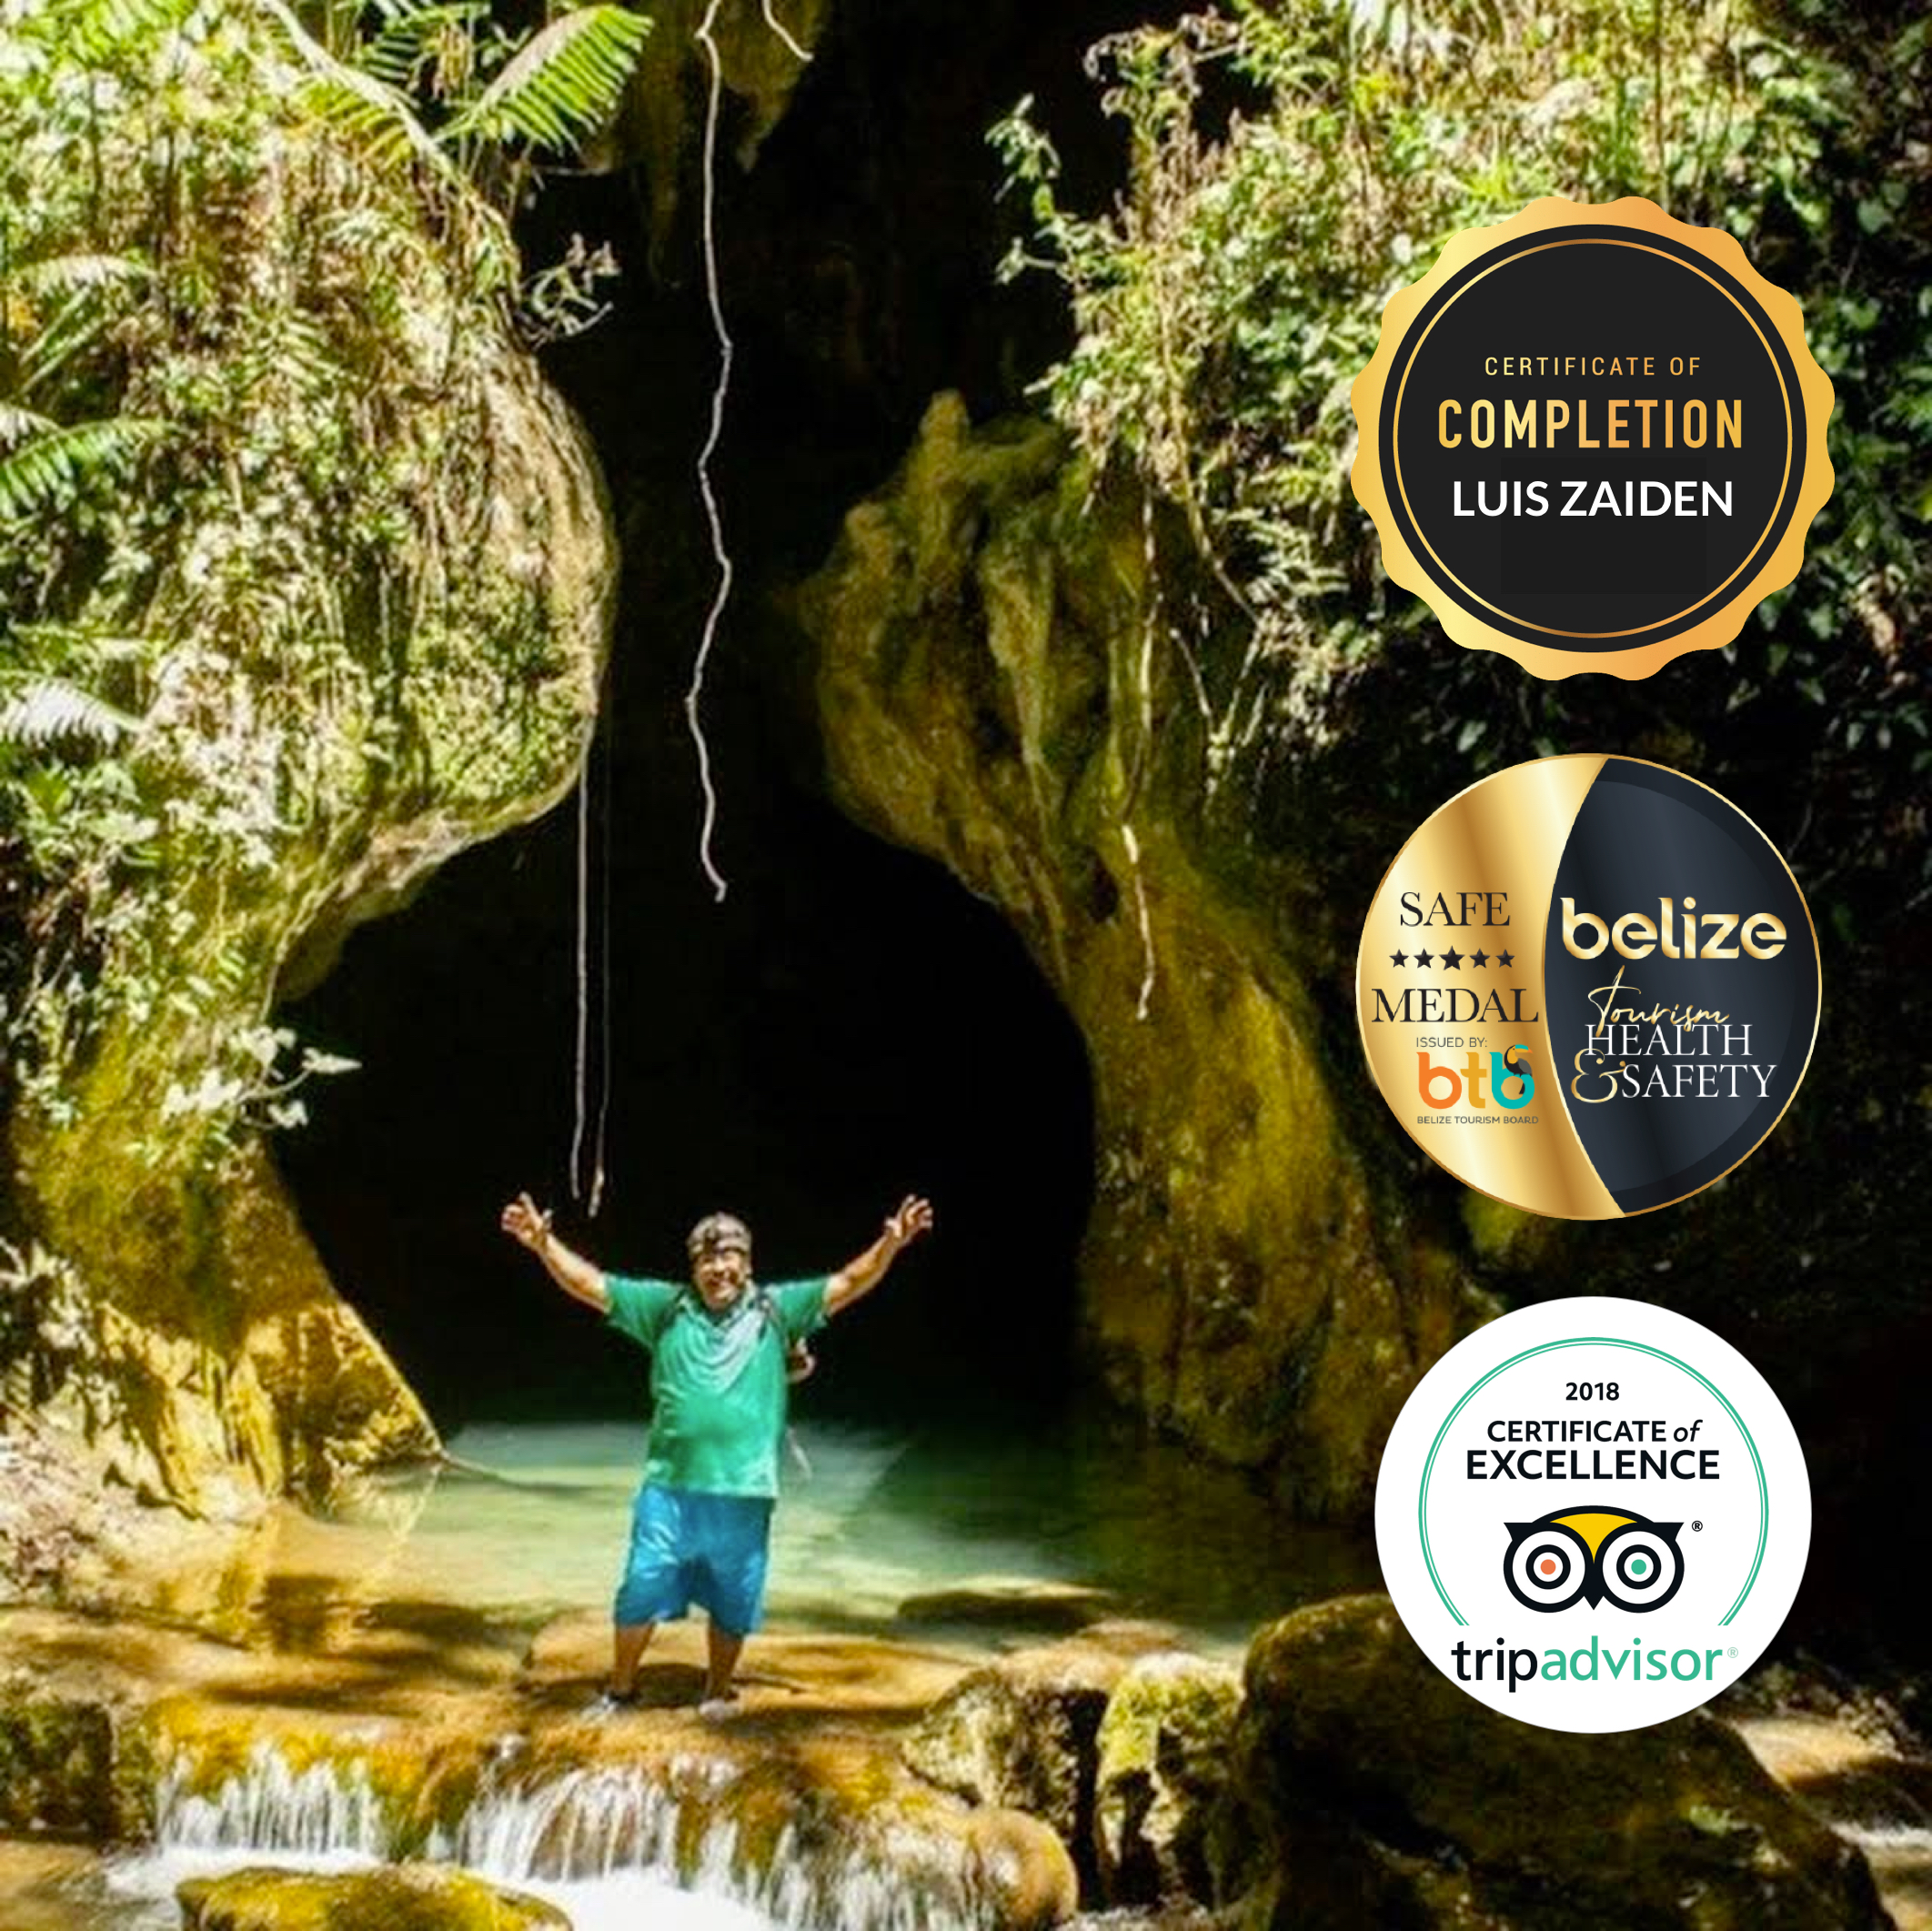 Belize ATM Cave guide Luis received certificate of excellent 2018